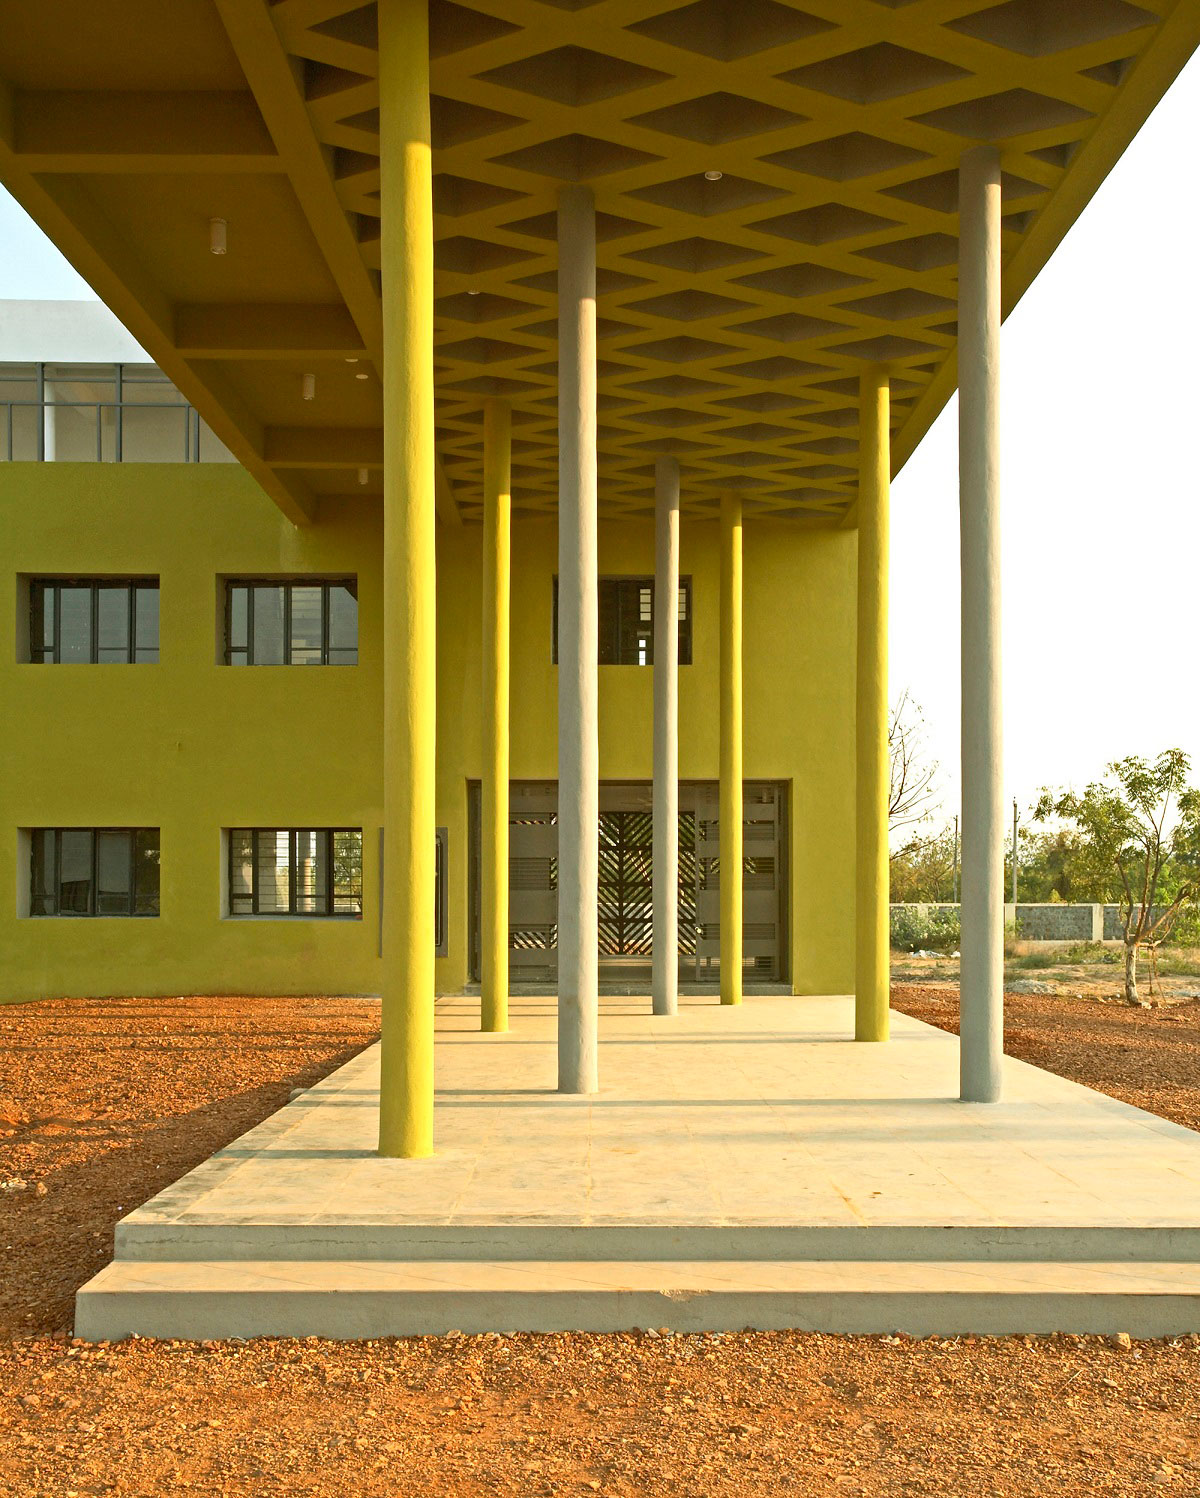 Student Hostels | DCOOP Architects